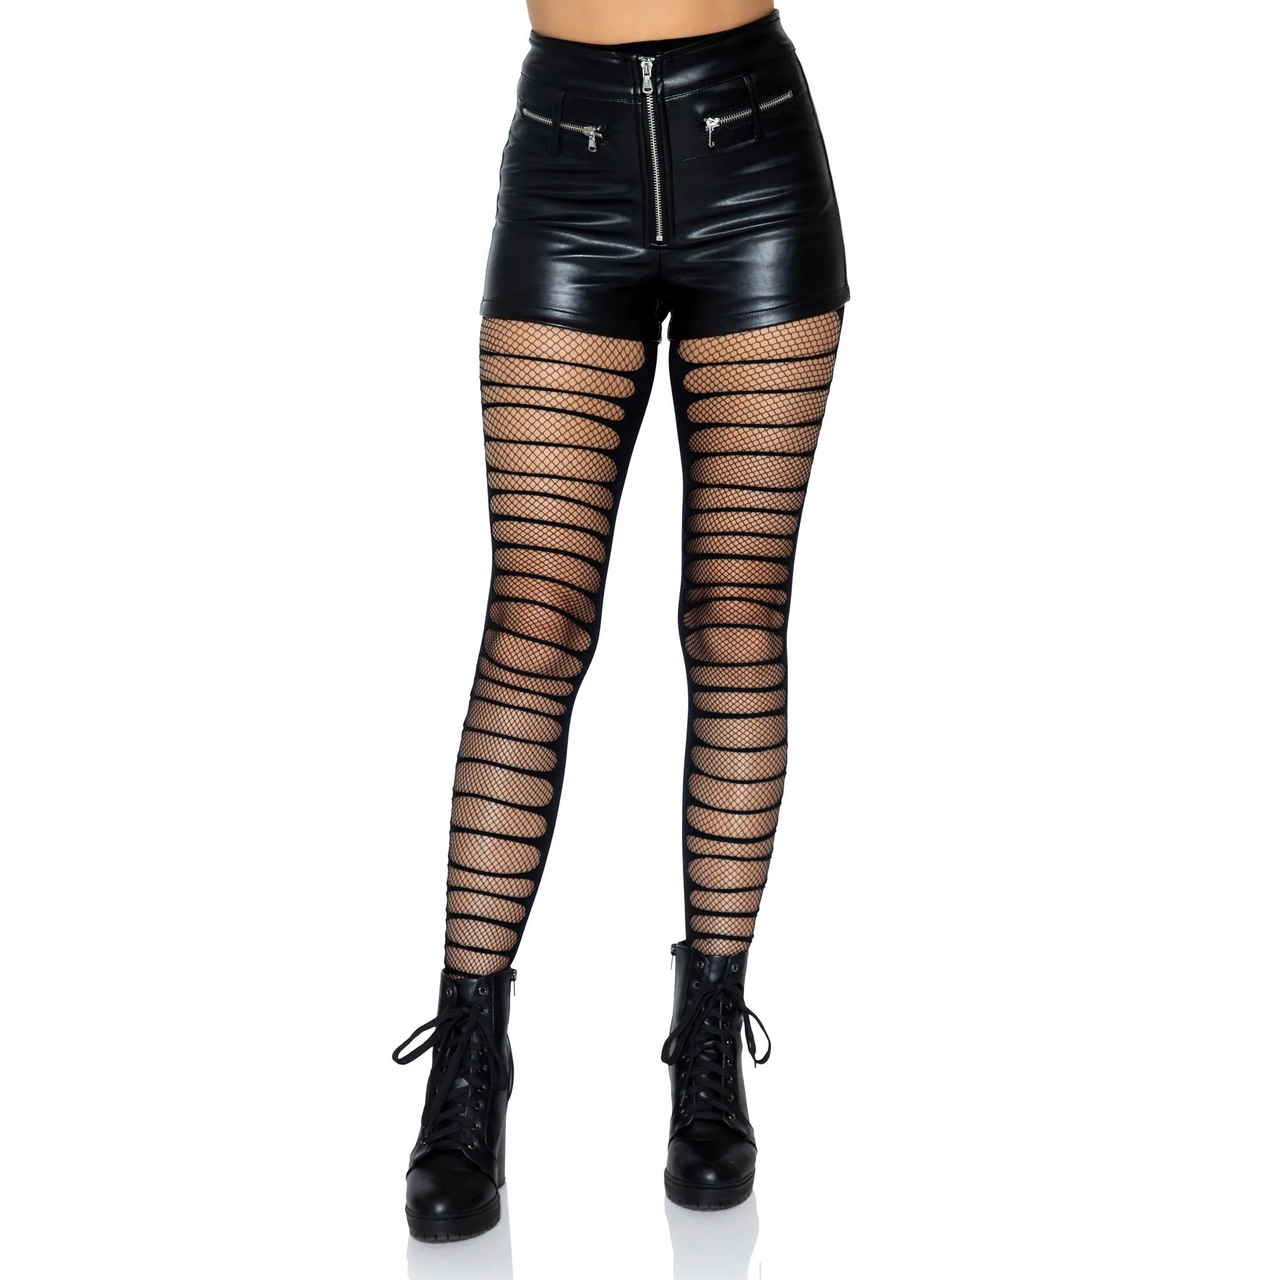 DOUBLE LAYER SHREDDED FISHNET TIGHTS